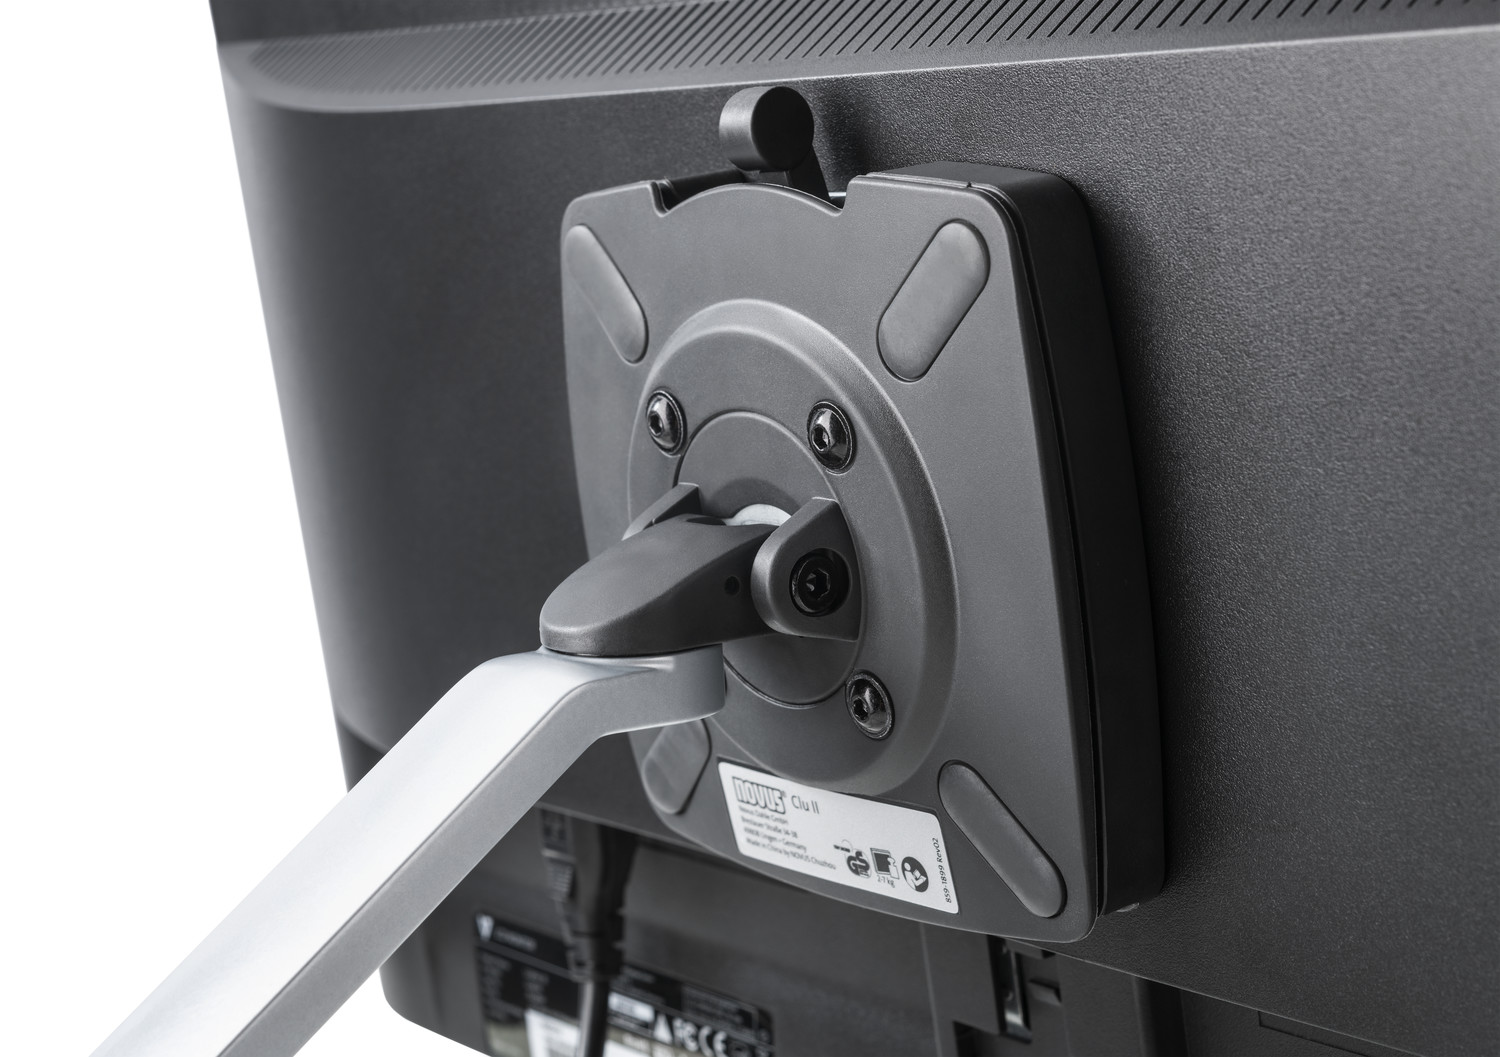 The high-quality, flat pivot joint offers almost unlimited freedom of movement, allowing monitors to be turned or tilted in any direction. Even large monitors are easy to handle and will stay securely in the adjusted position.